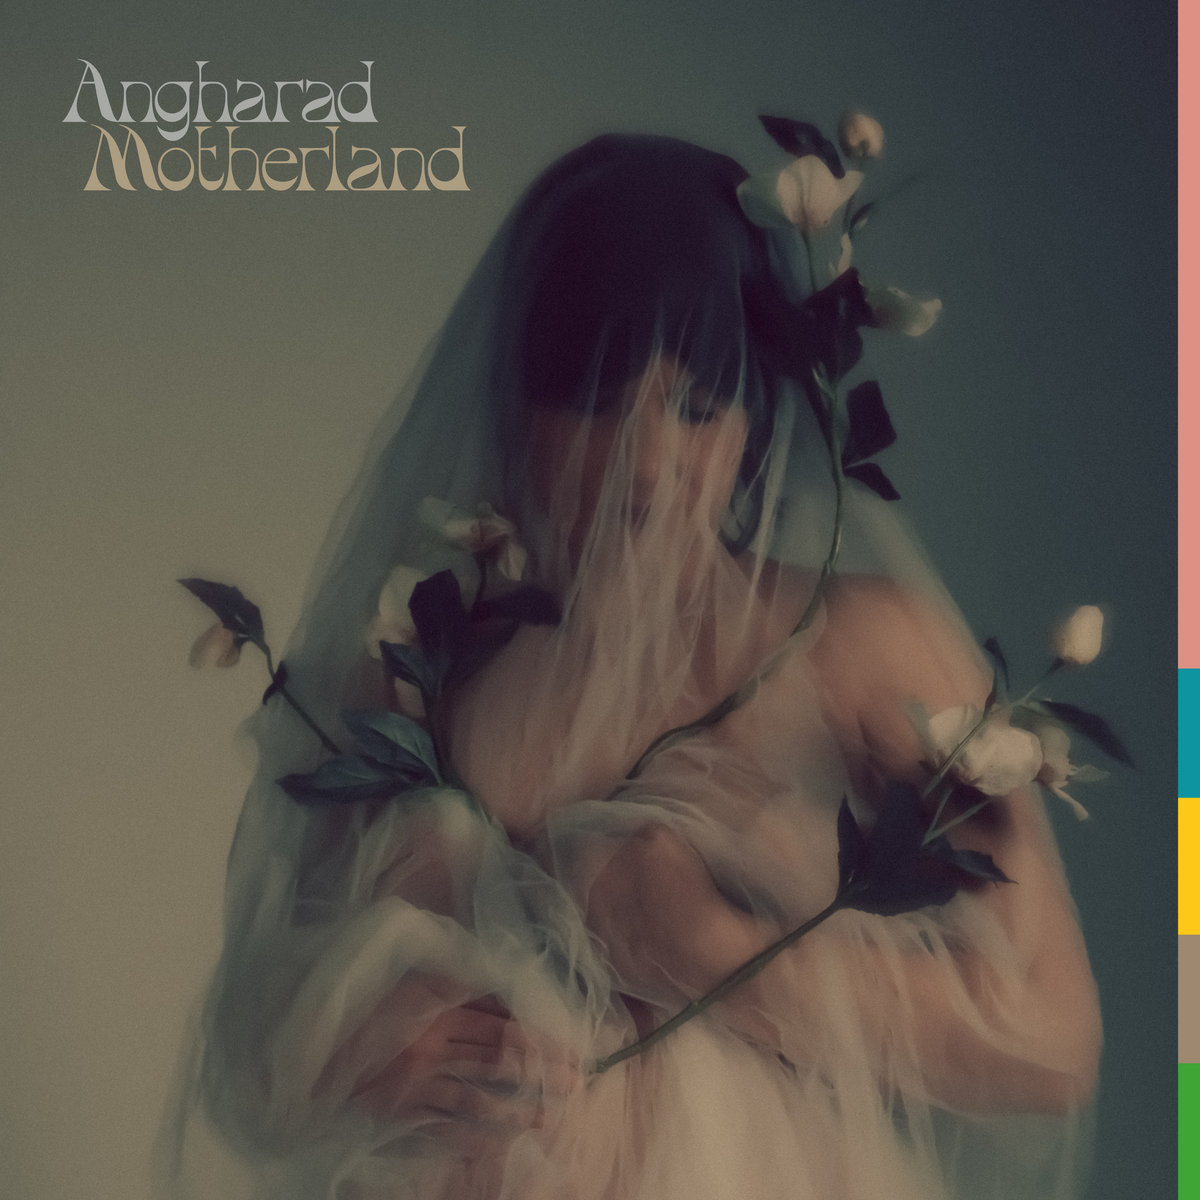 DEBUT ALBUM REVIEW: Motherland by Angharad